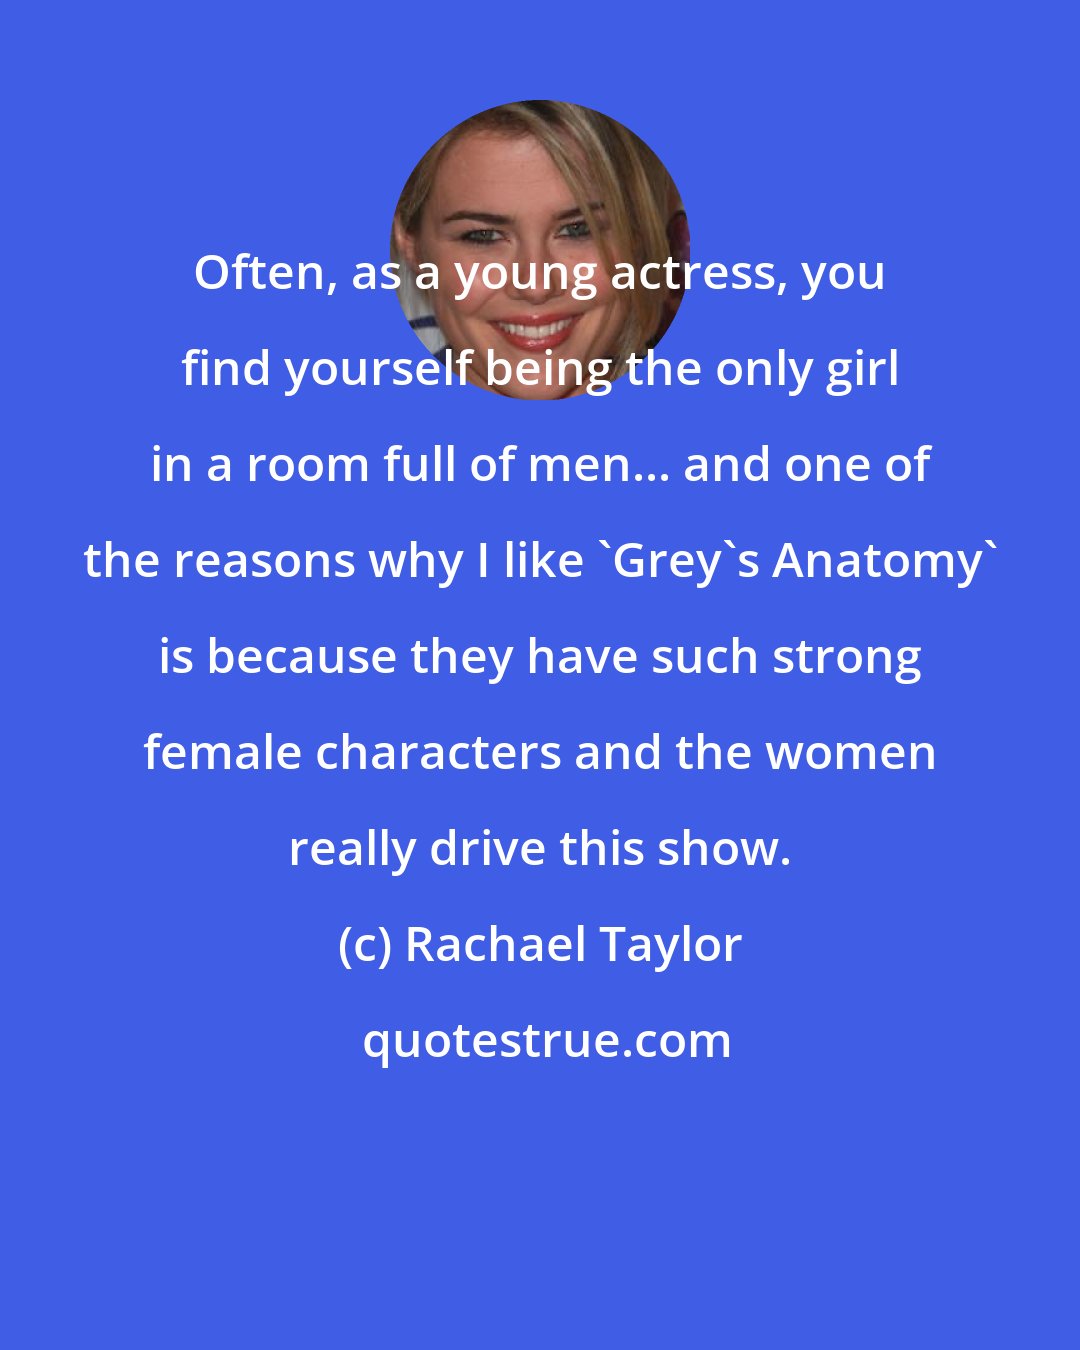 Rachael Taylor: Often, as a young actress, you find yourself being the only girl in a room full of men... and one of the reasons why I like 'Grey's Anatomy' is because they have such strong female characters and the women really drive this show.